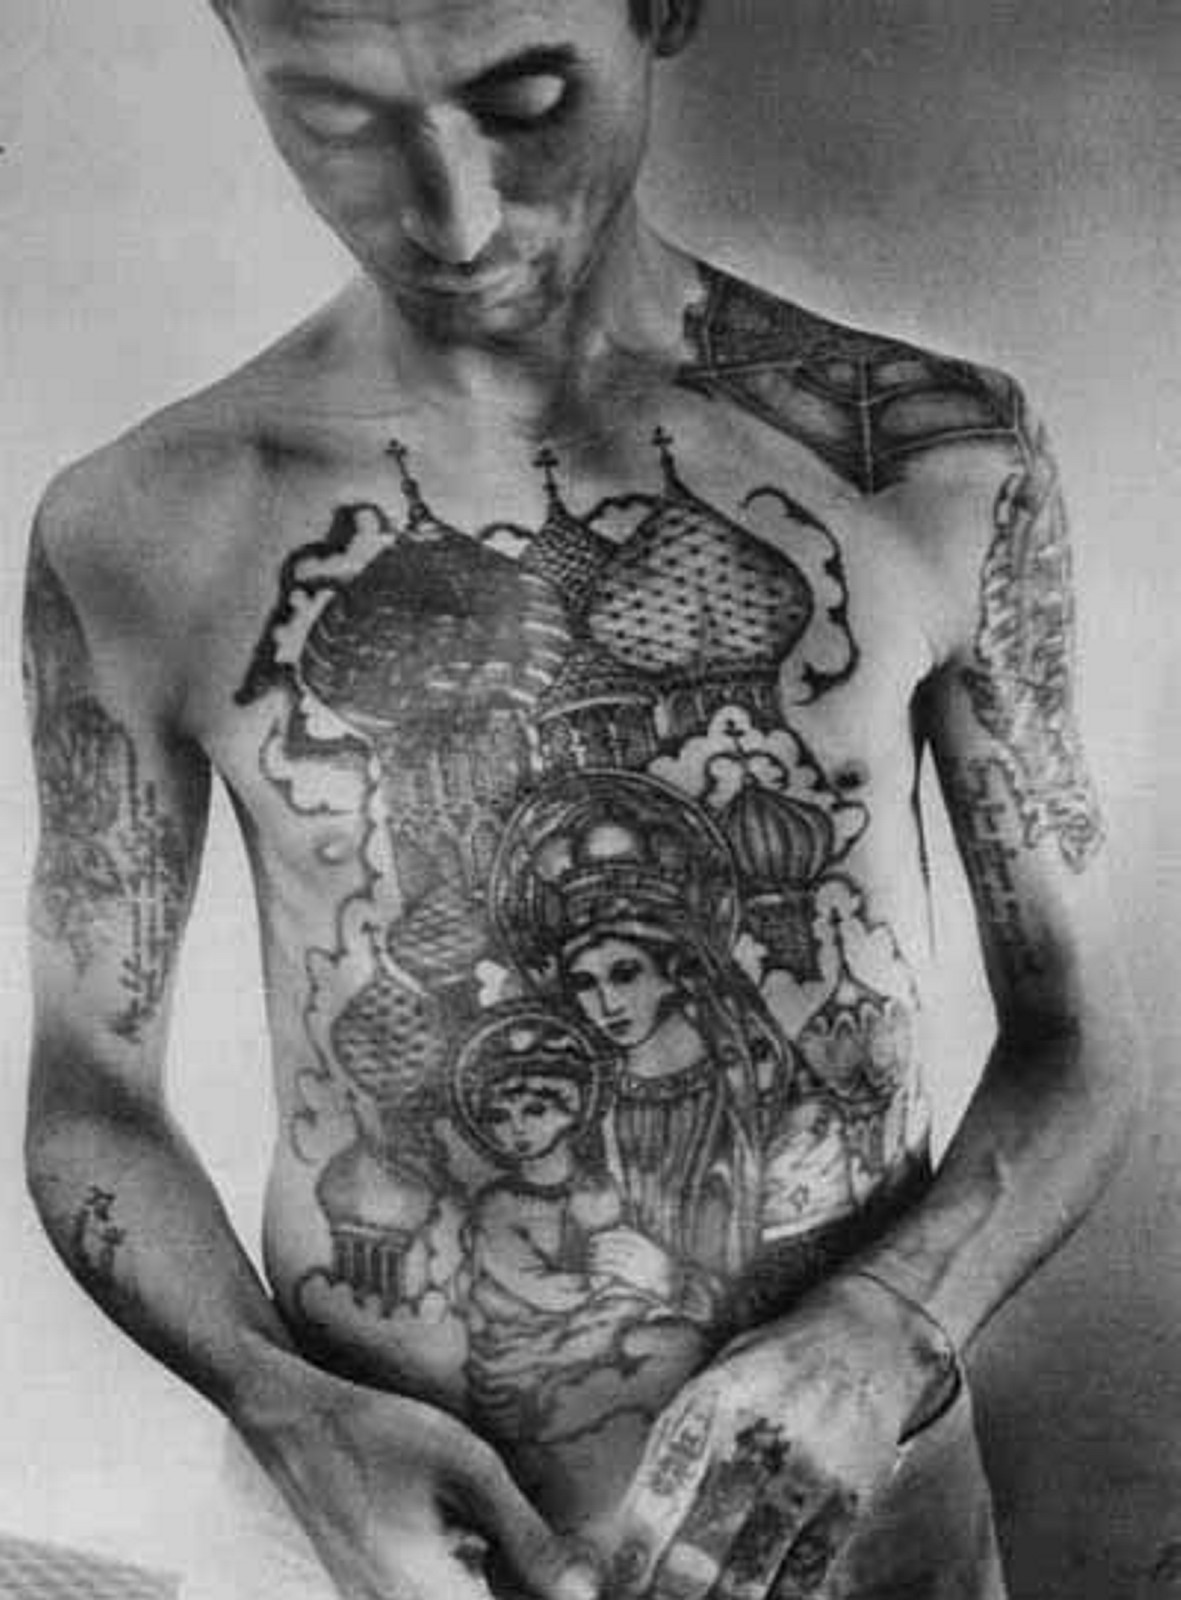 One of the most iconic images in Russian prison tattoos is the “Kremlin” or the Cathedral. With the number of its dome towers equal to the number of sentences served. 6 church domes, for example, convey that the bearer has served 6 sentences.